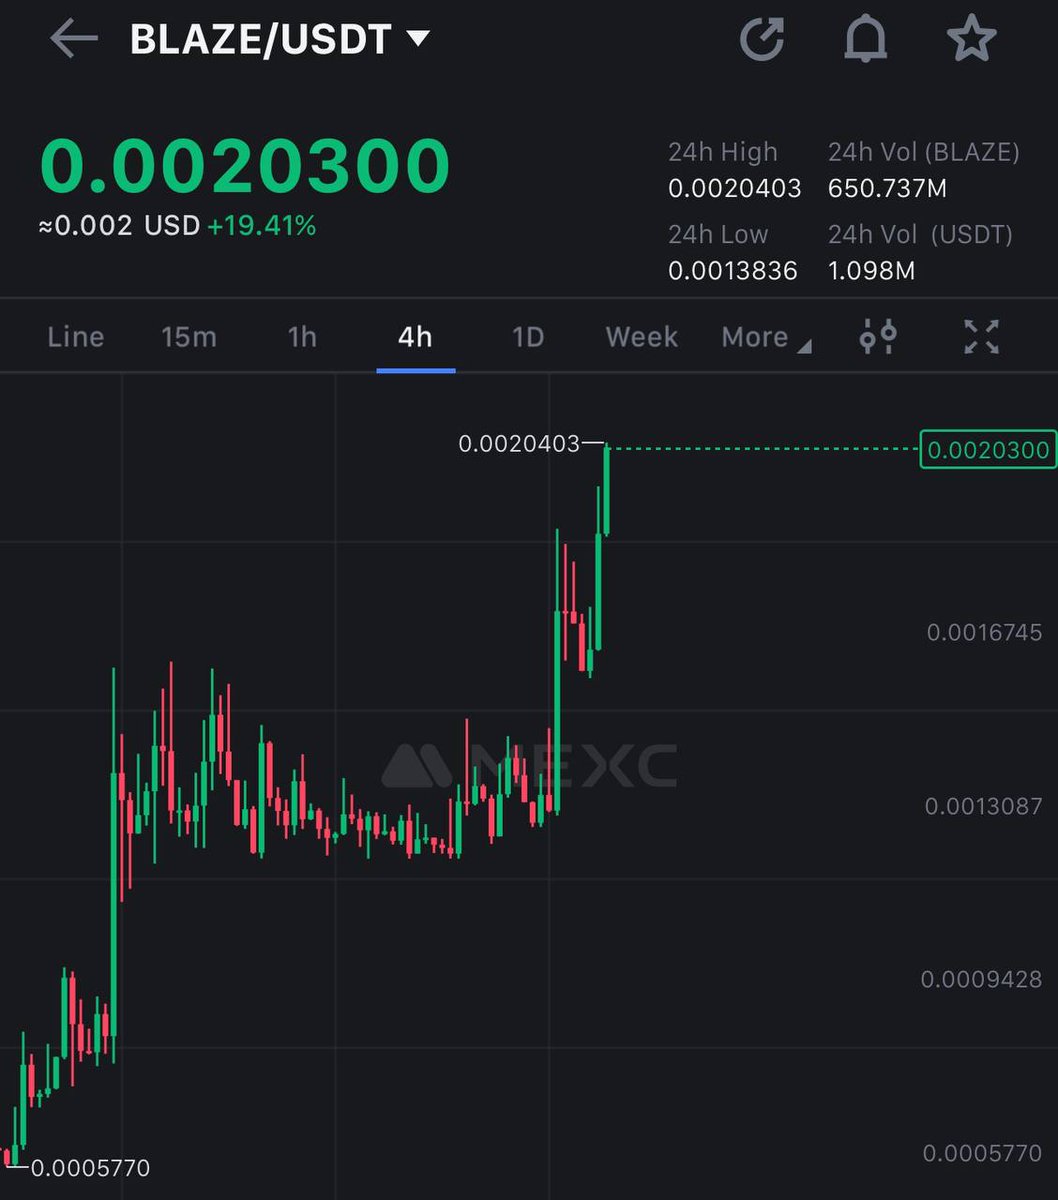 $BLAZE is going bonkers today 🚀🚀 Now it's at more than 𝟳𝟬% profit for our community. Major #Crypto coins are going down, but Wise Advice calls are on fire🔥 If you don't want to miss it, keep the notifications on 🔔